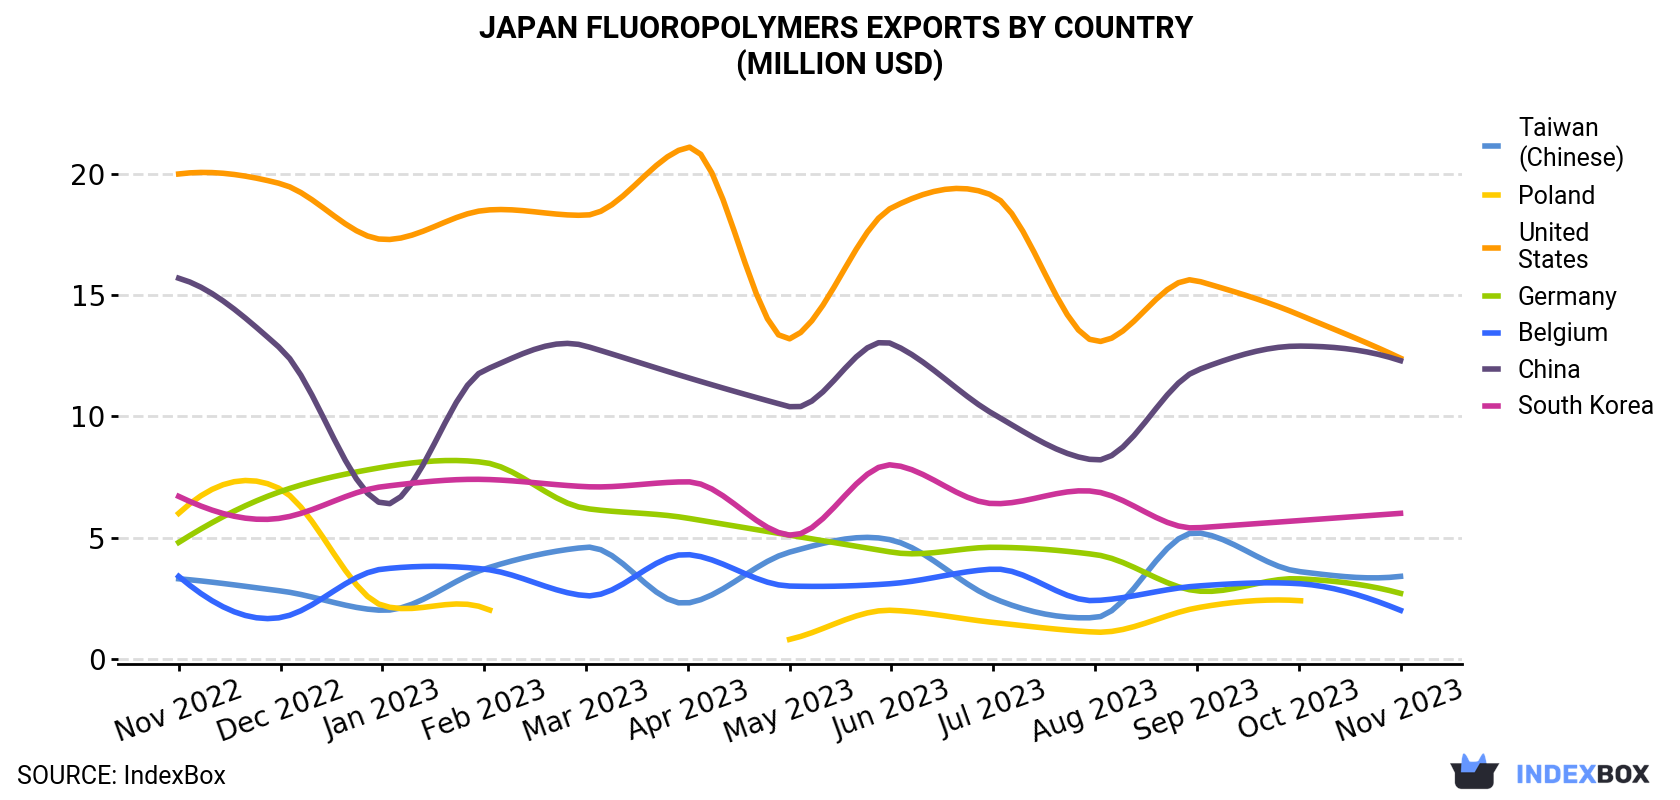 Japan Fluoropolymers Exports By Country (Million USD)